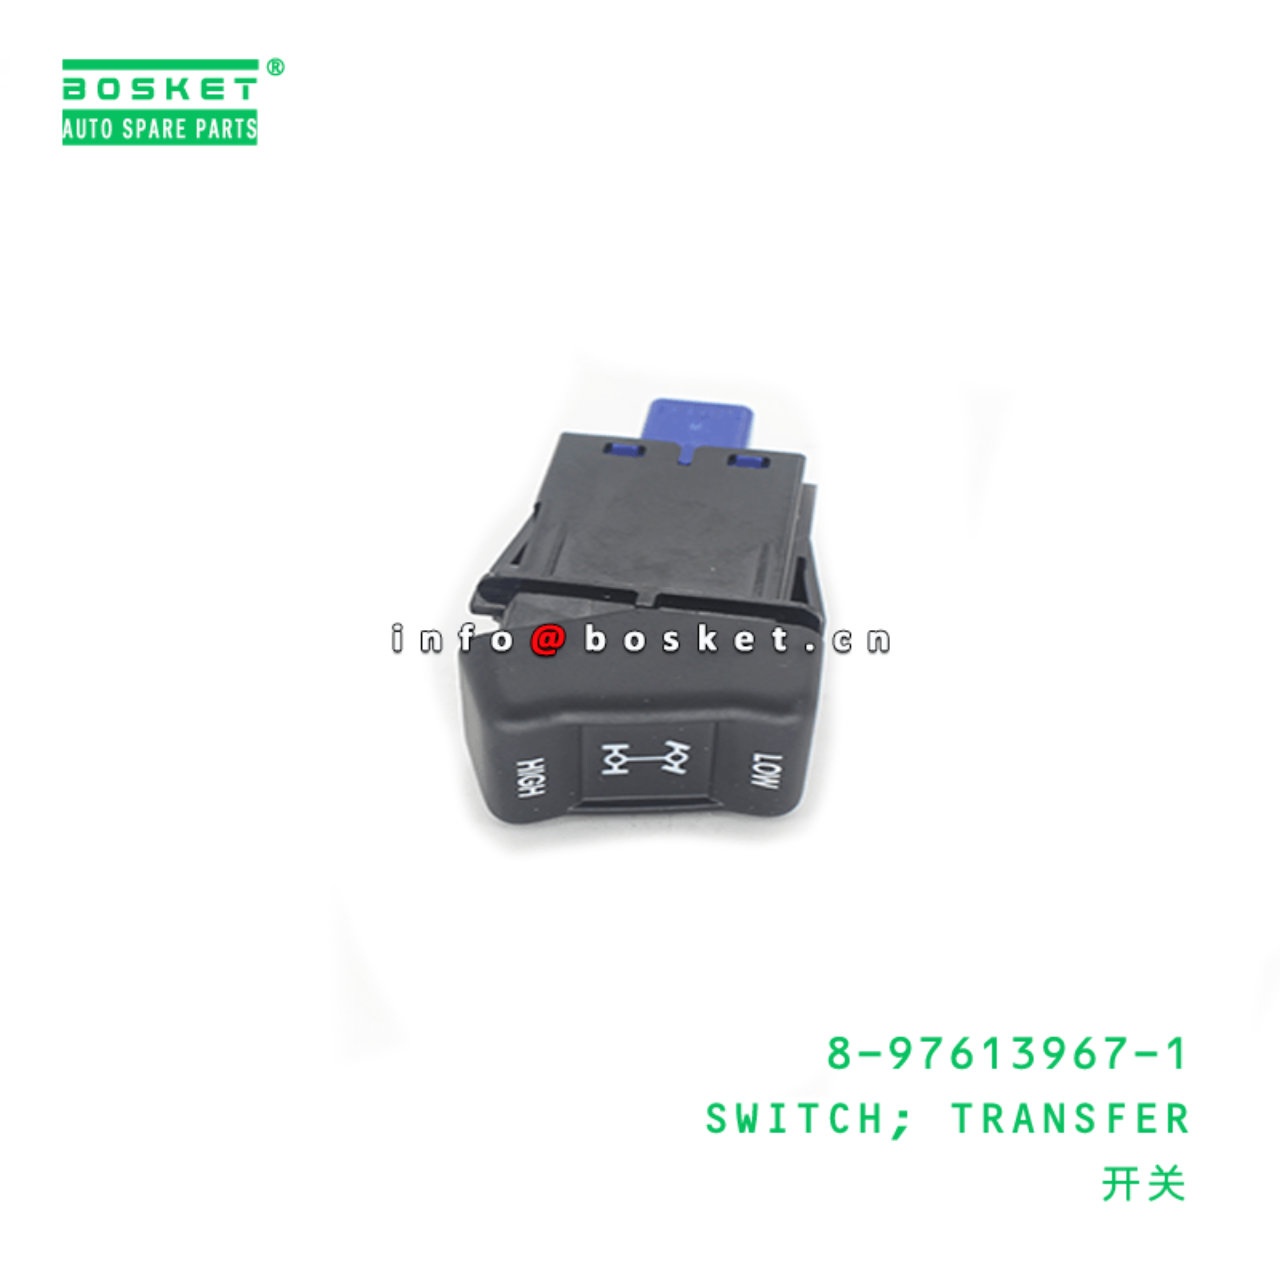 8-97613967-1 Transfer Switch 8976139671 Suitable for ISUZU F Series Truck